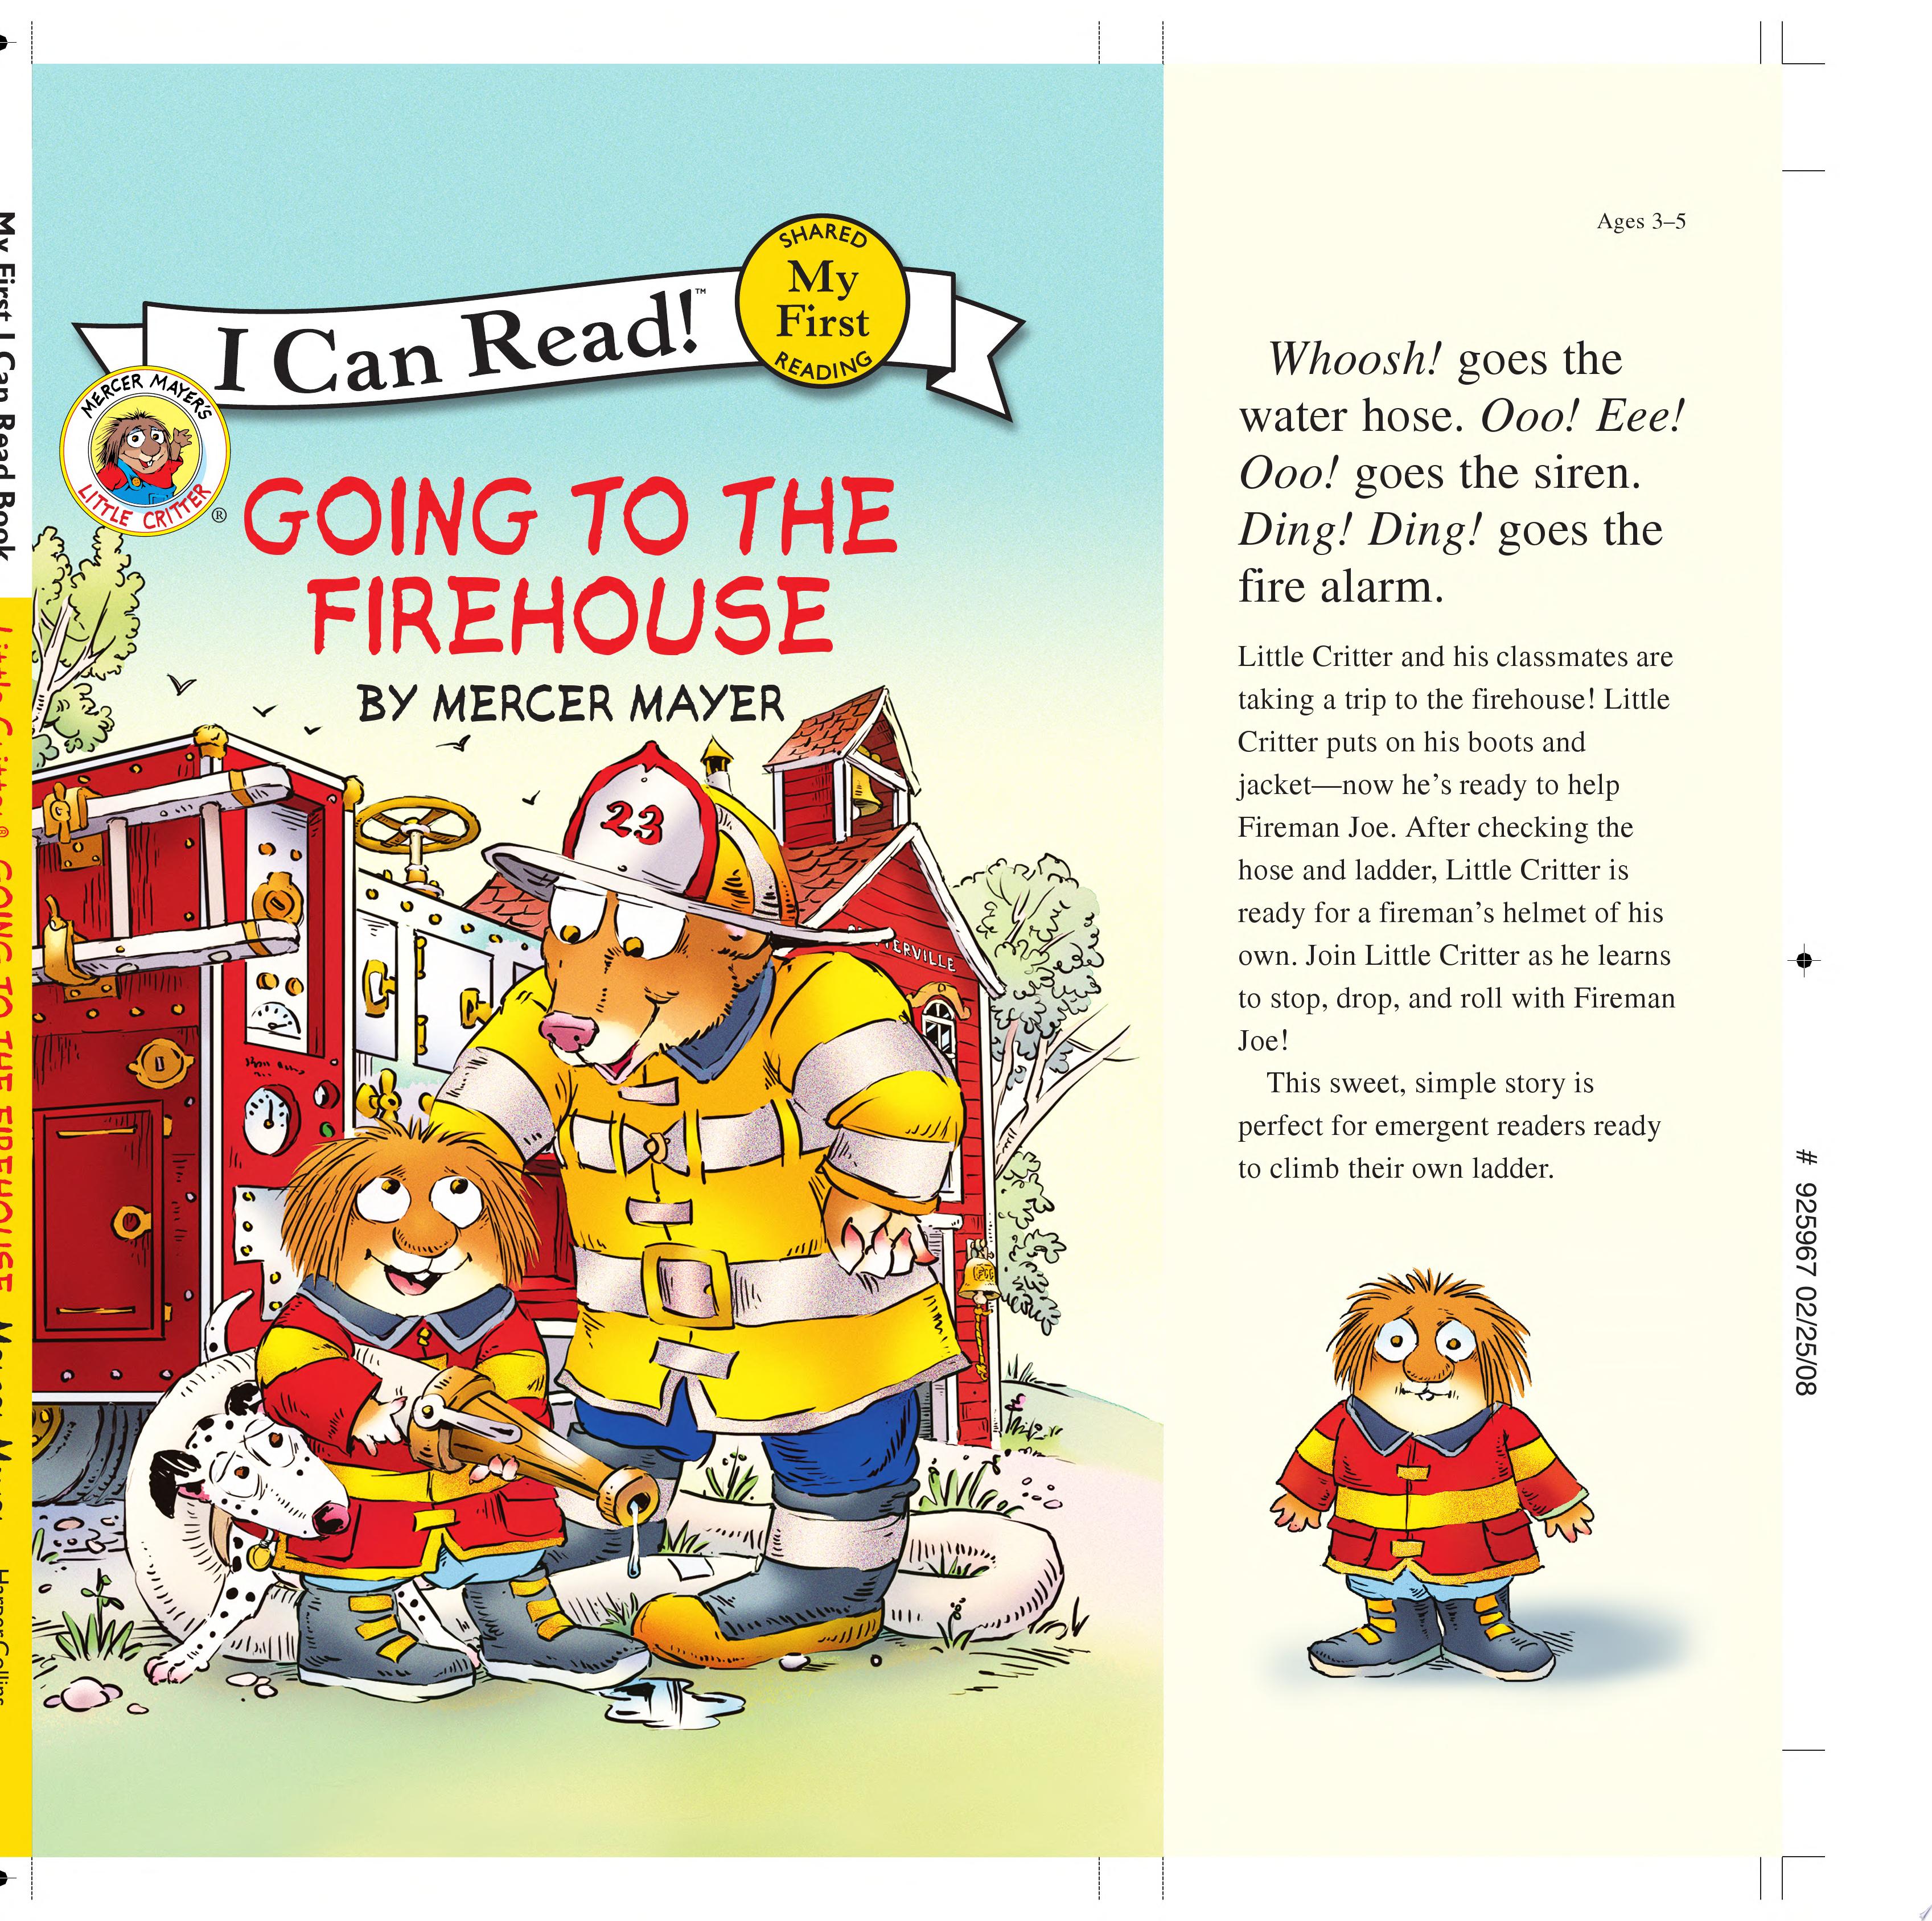 Image for "Little Critter: Going to the Firehouse"